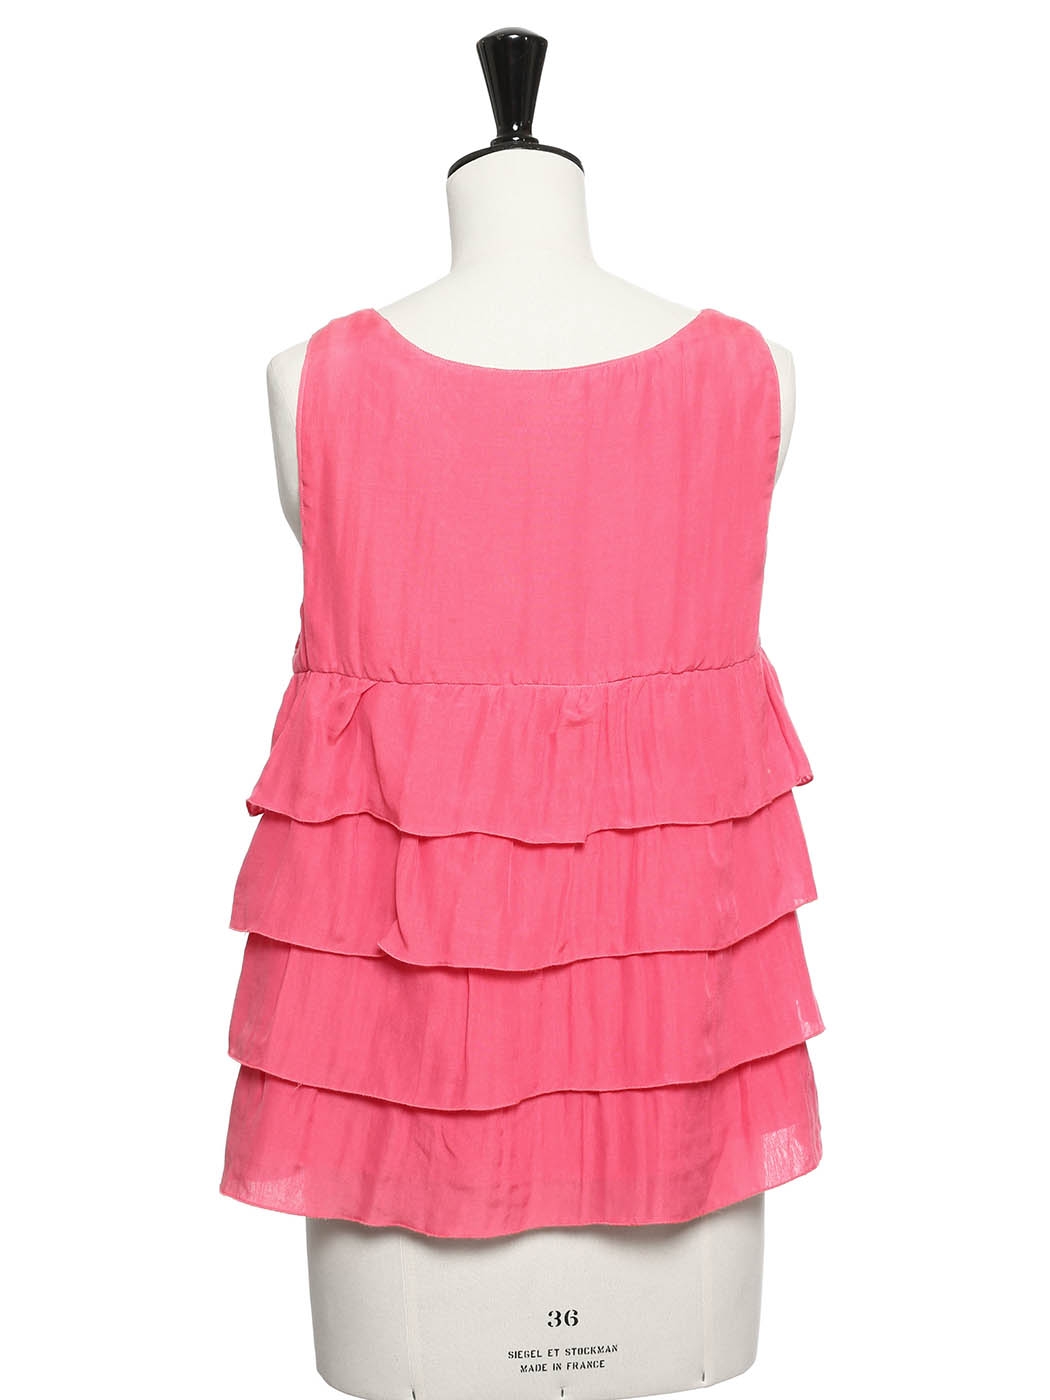 Boutique LE MONT SAINT MICHEL Raspberry pink silk and cotton ruffle  sleeveless top Size 36